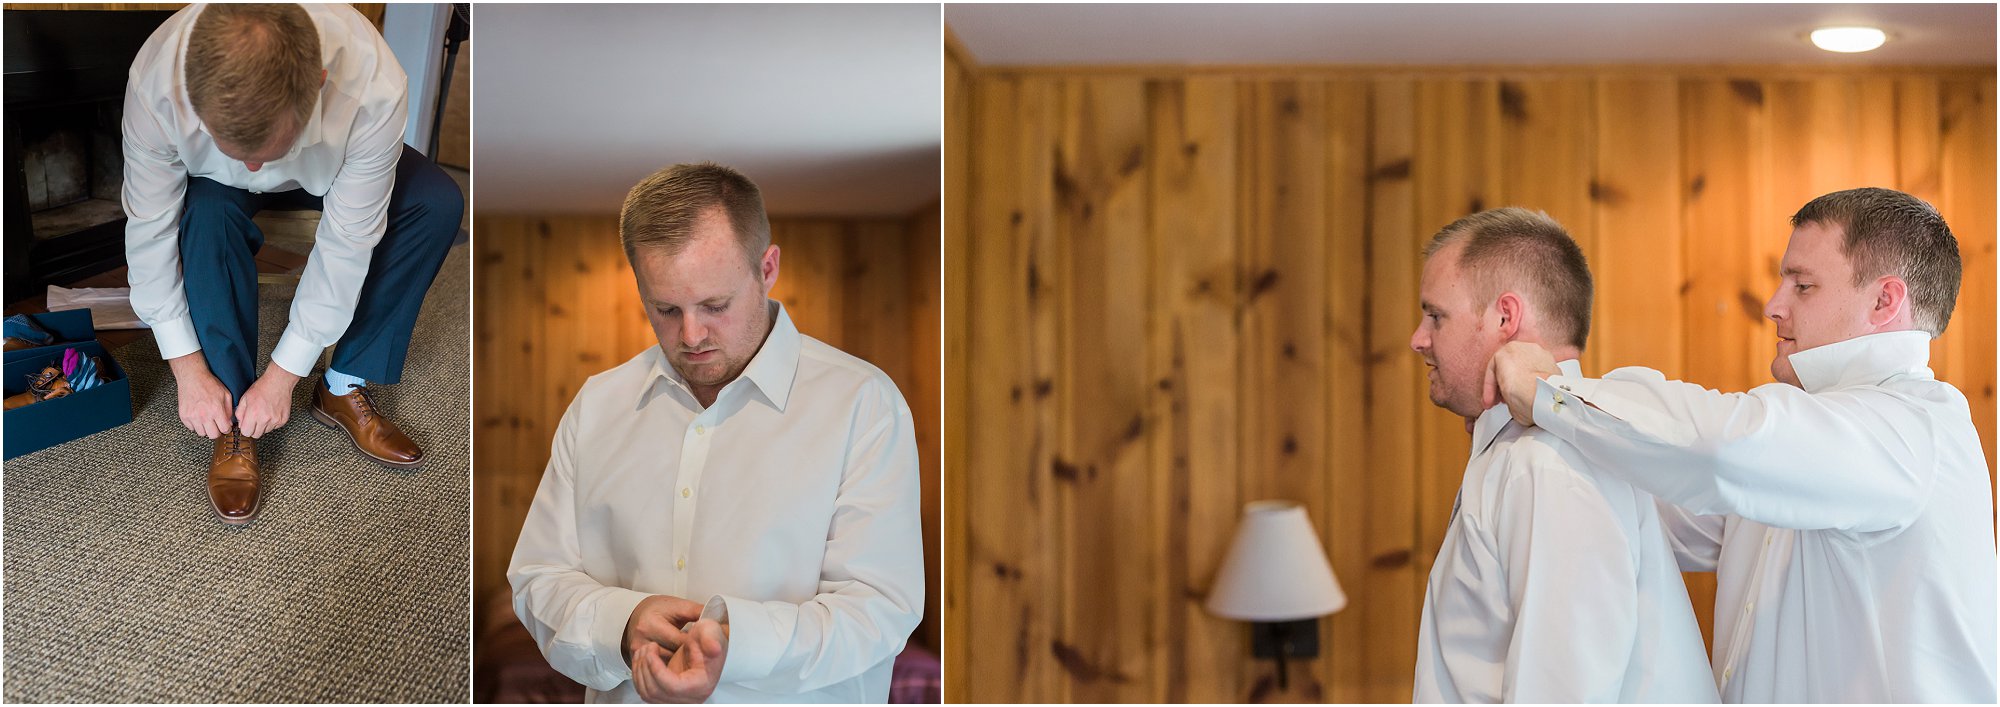 The groom gets ready in his rustic cabin at Rock Springs Ranch near Bend, OR. | Erica Swantek Photography